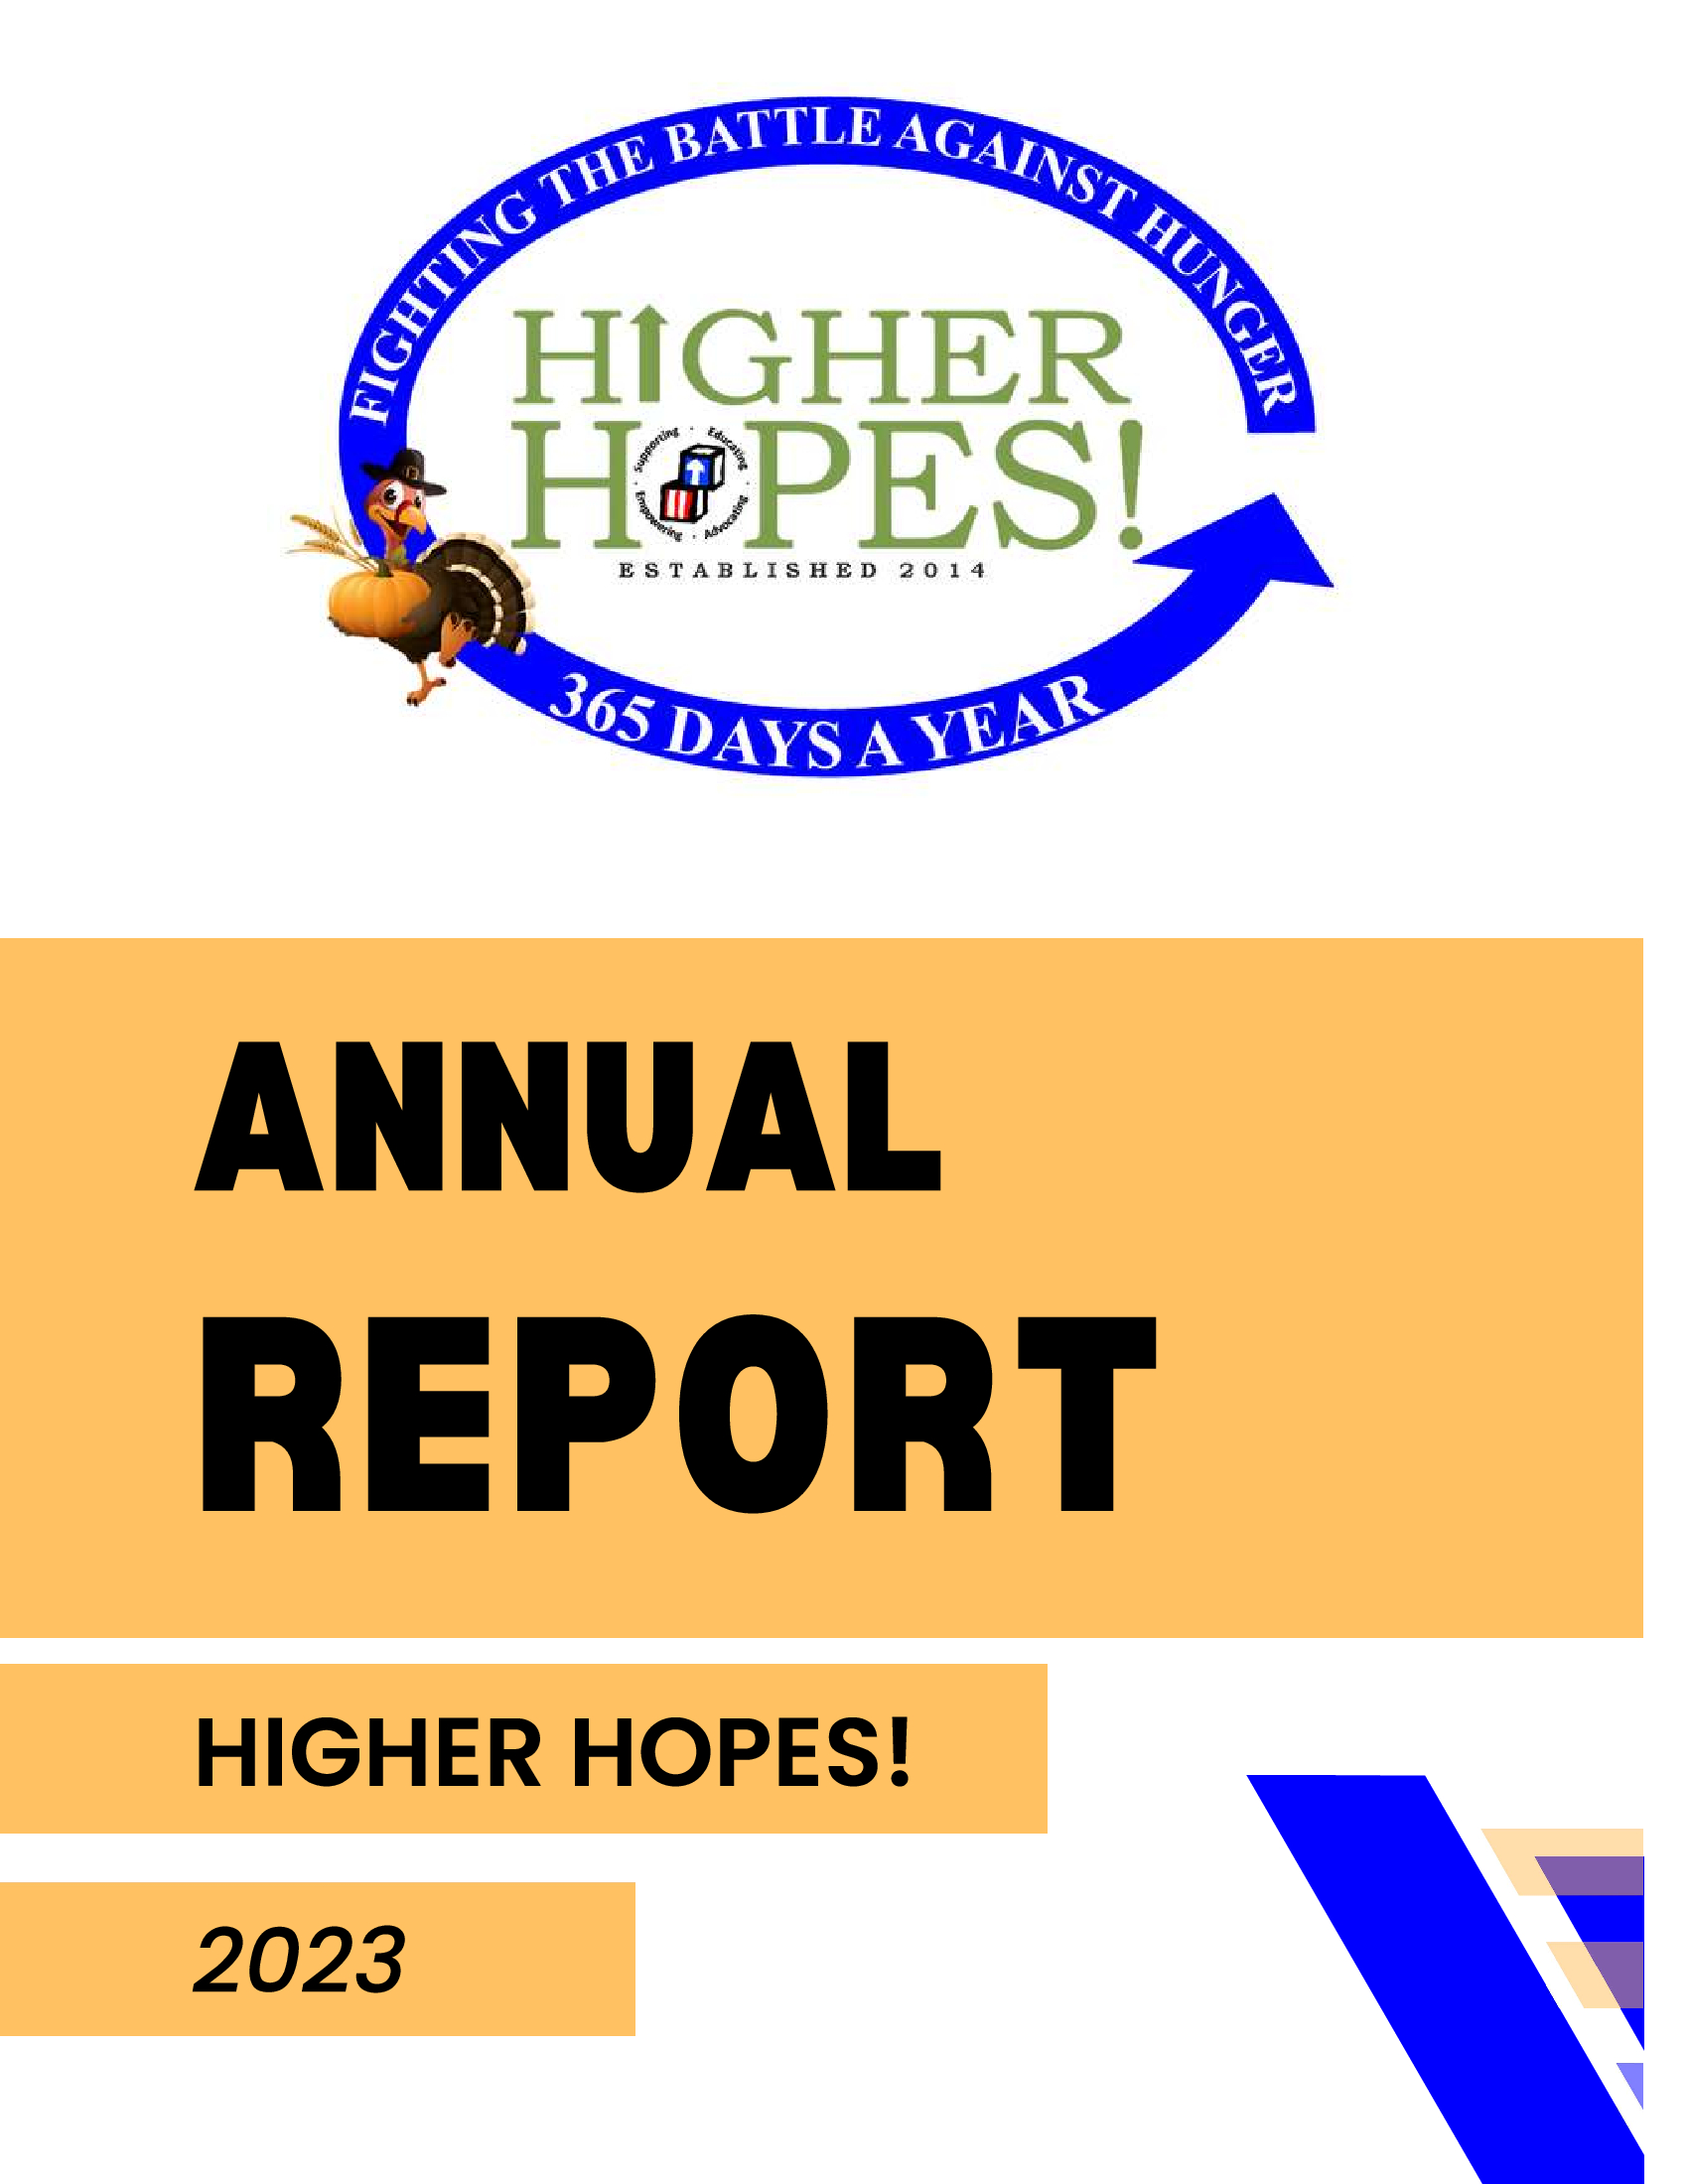 Higher Hopes! 2023 Annual Report cover page image with logo